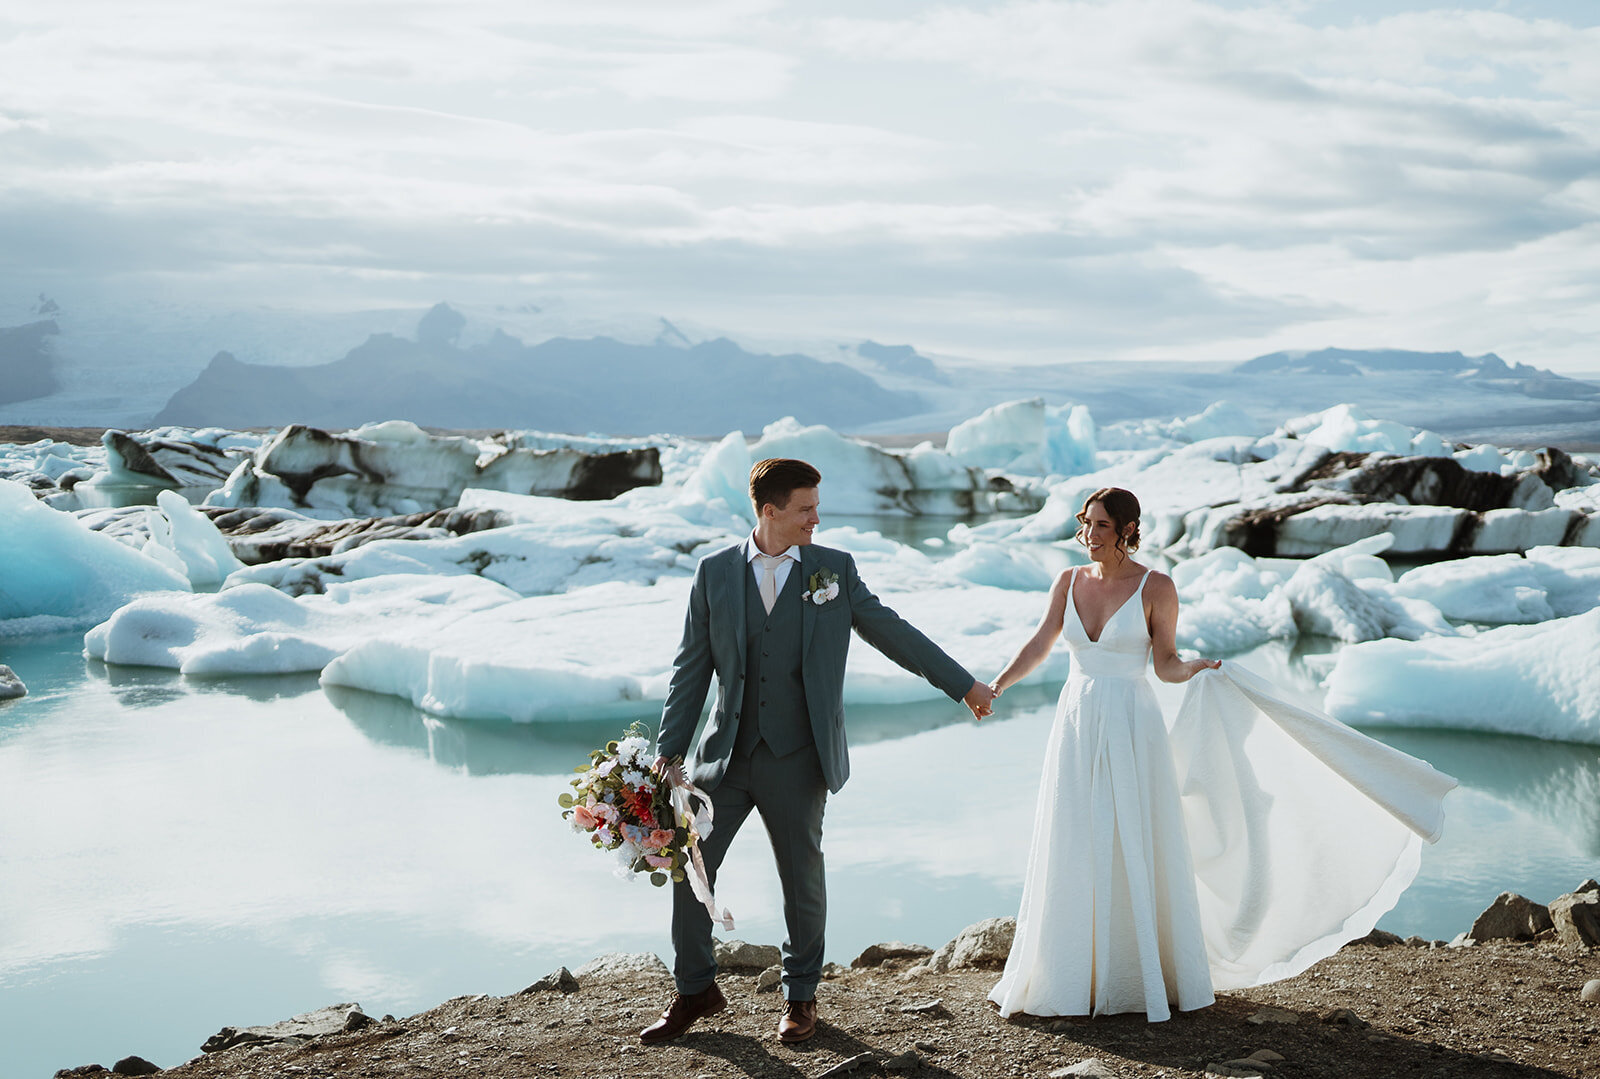 the bride and groom are walking together holding hands and smiling. the background is glaciers and sunshine. the bride has her dress flipped up and the groom is smiling at her while holding her flowers.